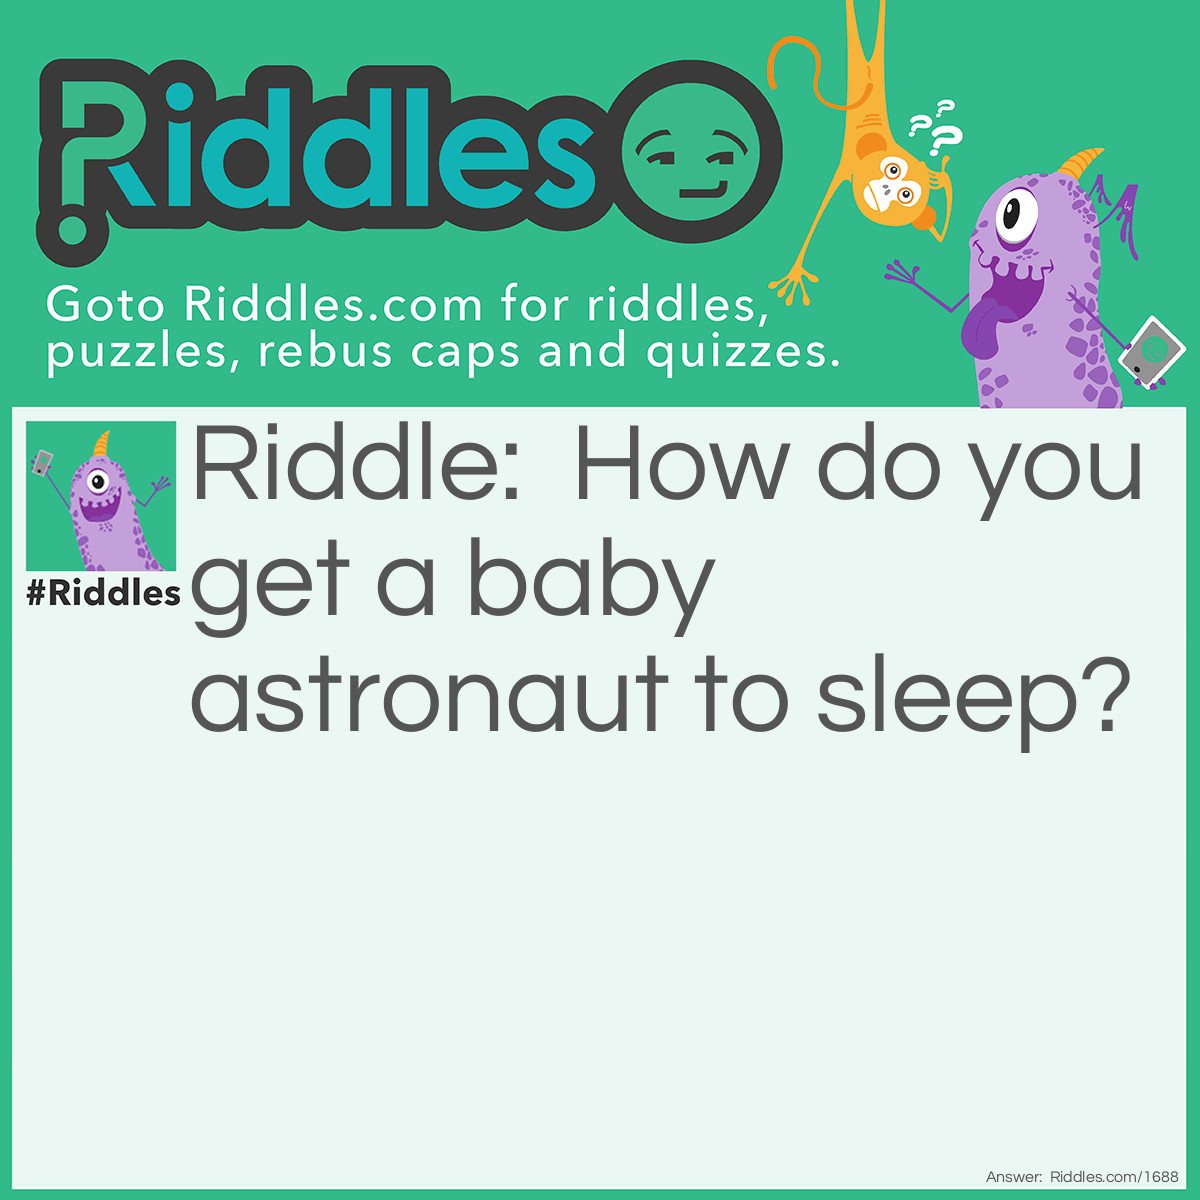 Riddle: How do you get a baby astronaut to sleep? Answer: You rock-it!